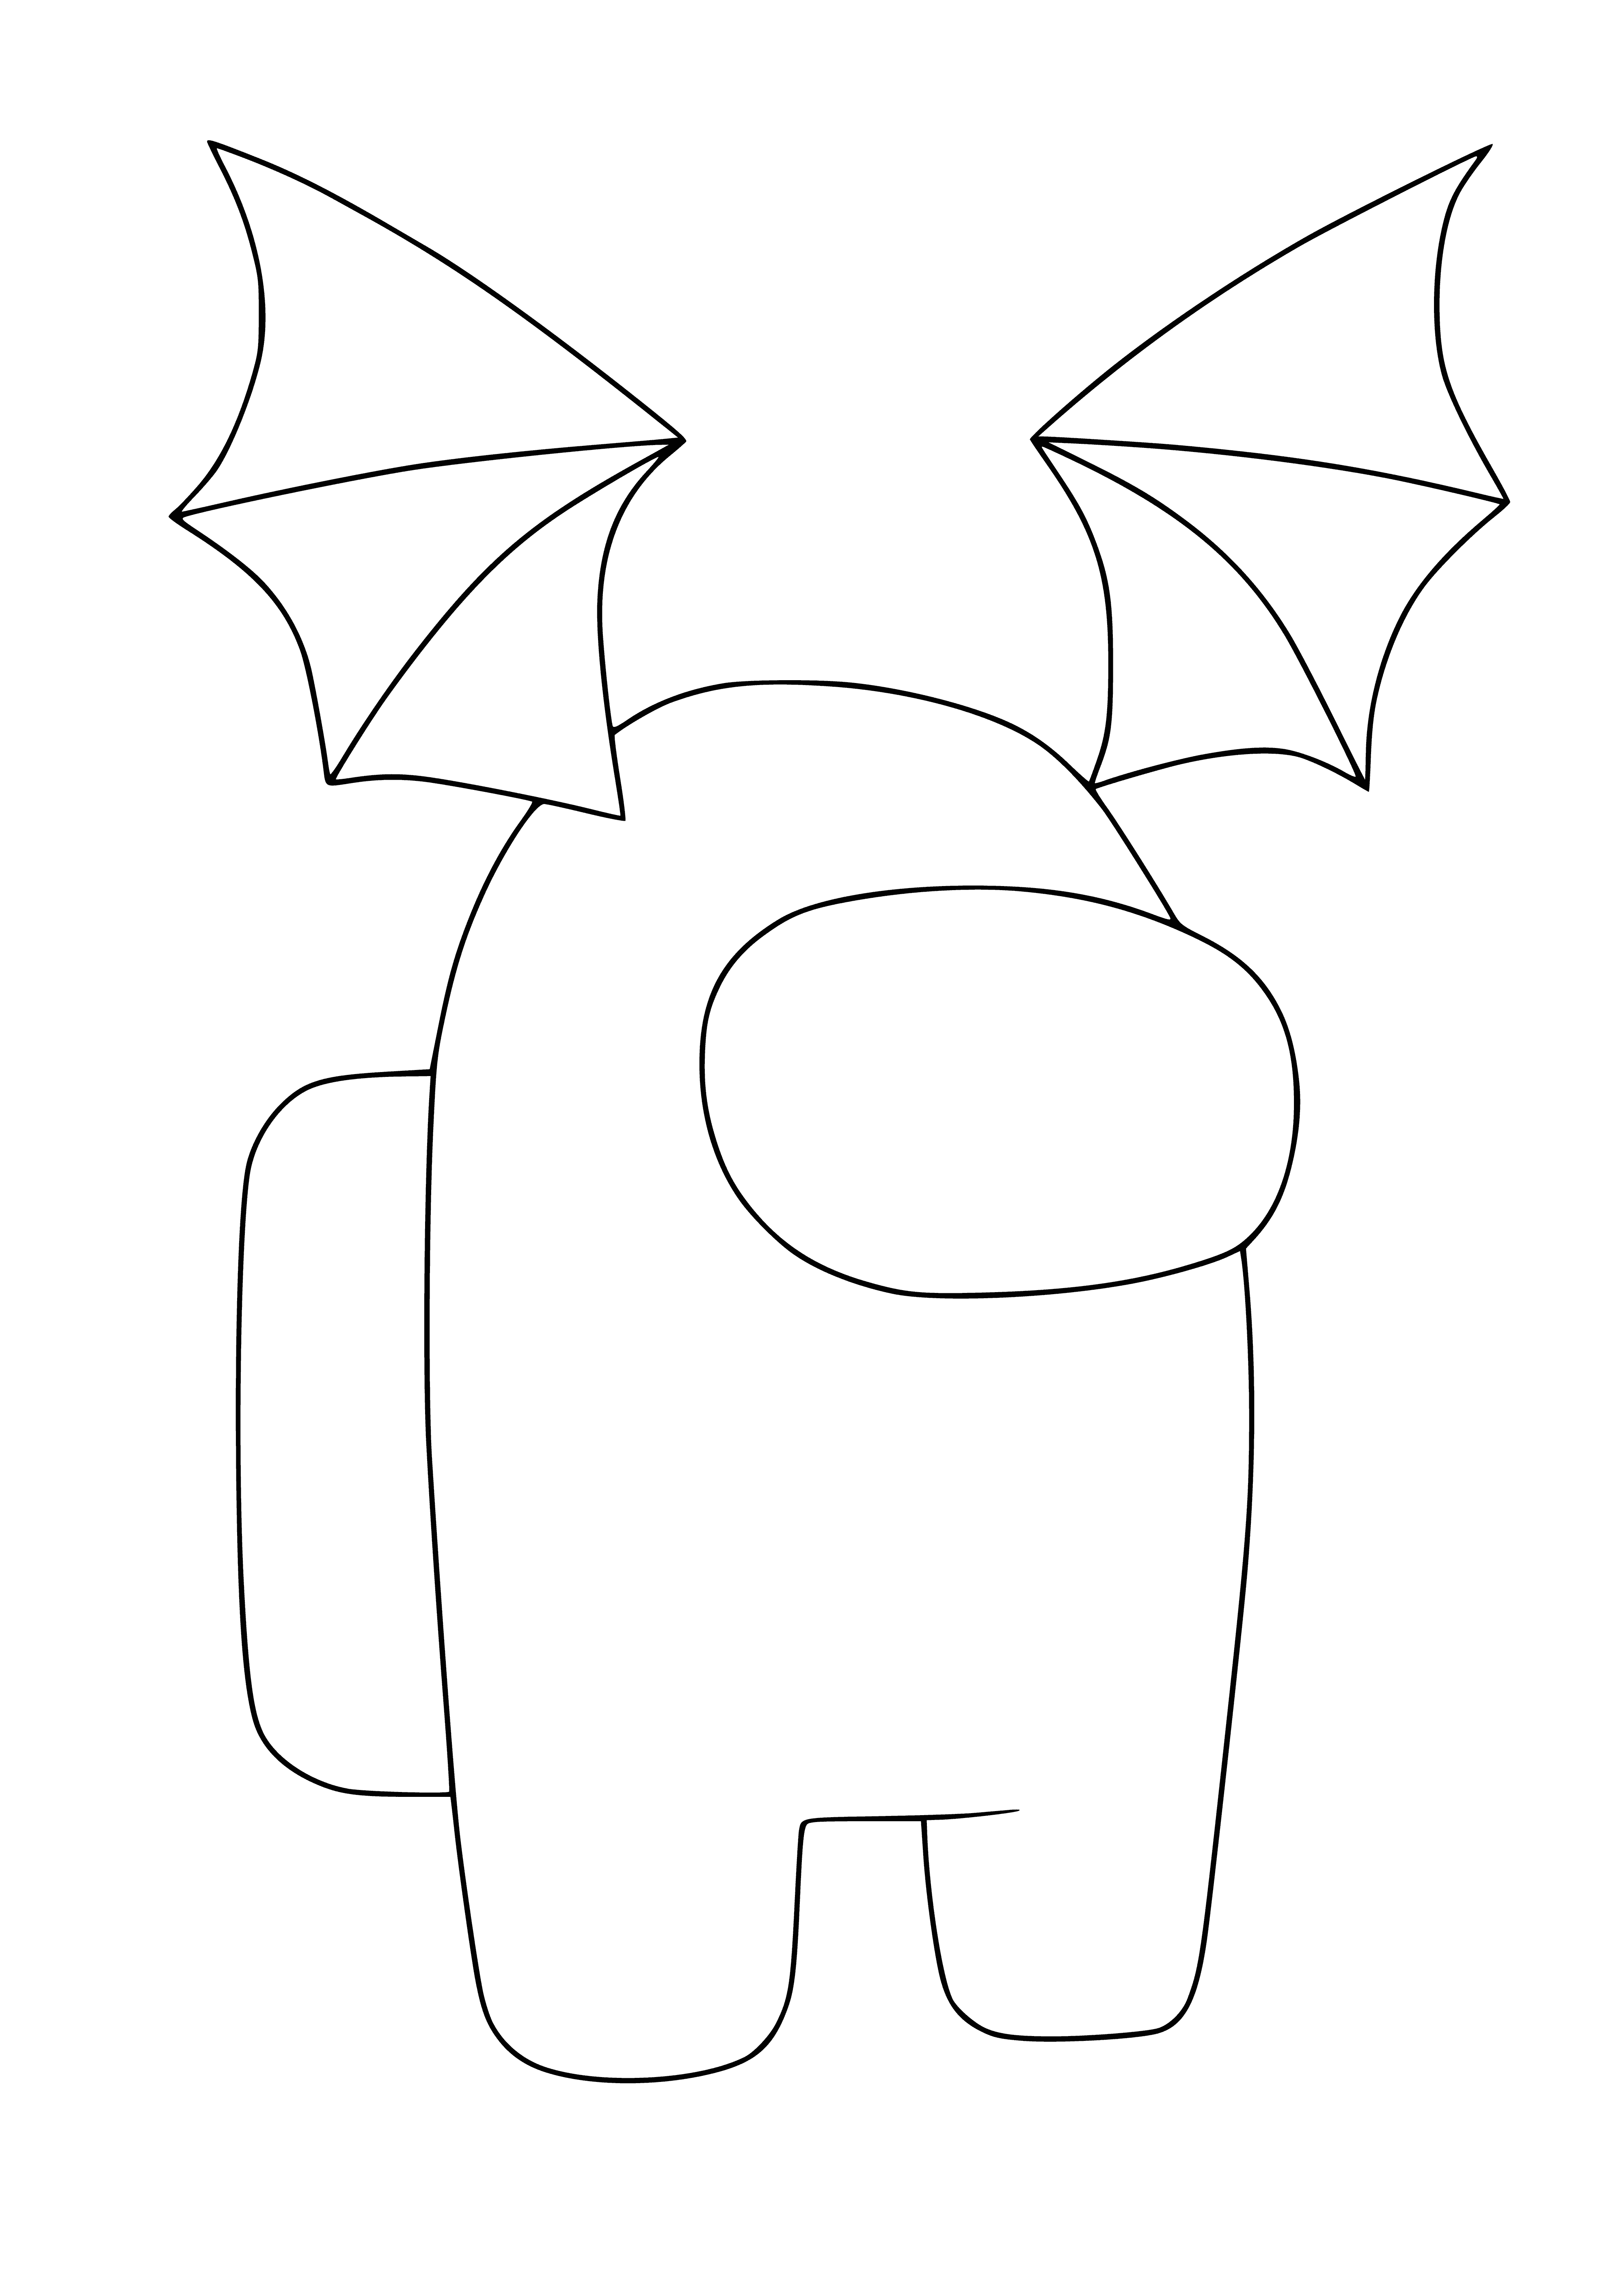 coloring page: Large character raising arms looking down at sleeping mini characters in an homage to Among Us.